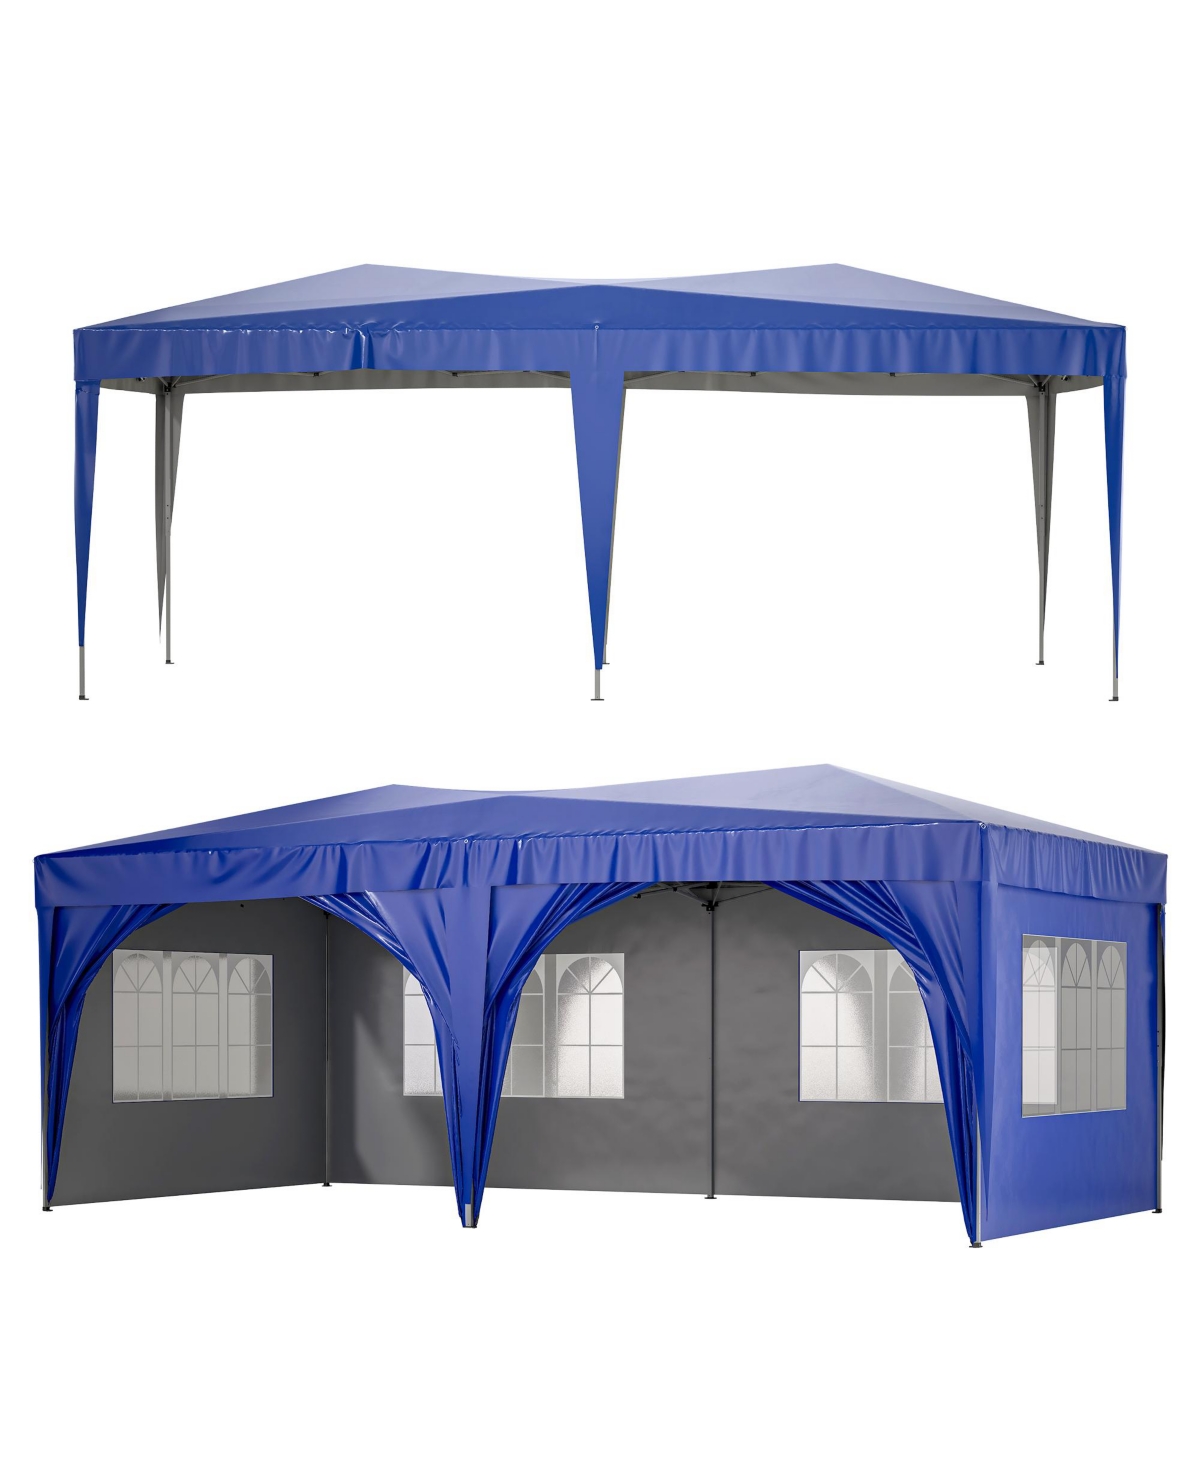 10'X20' Pop Up Canopy Tent with 6 Sidewalls + Bag - Blue